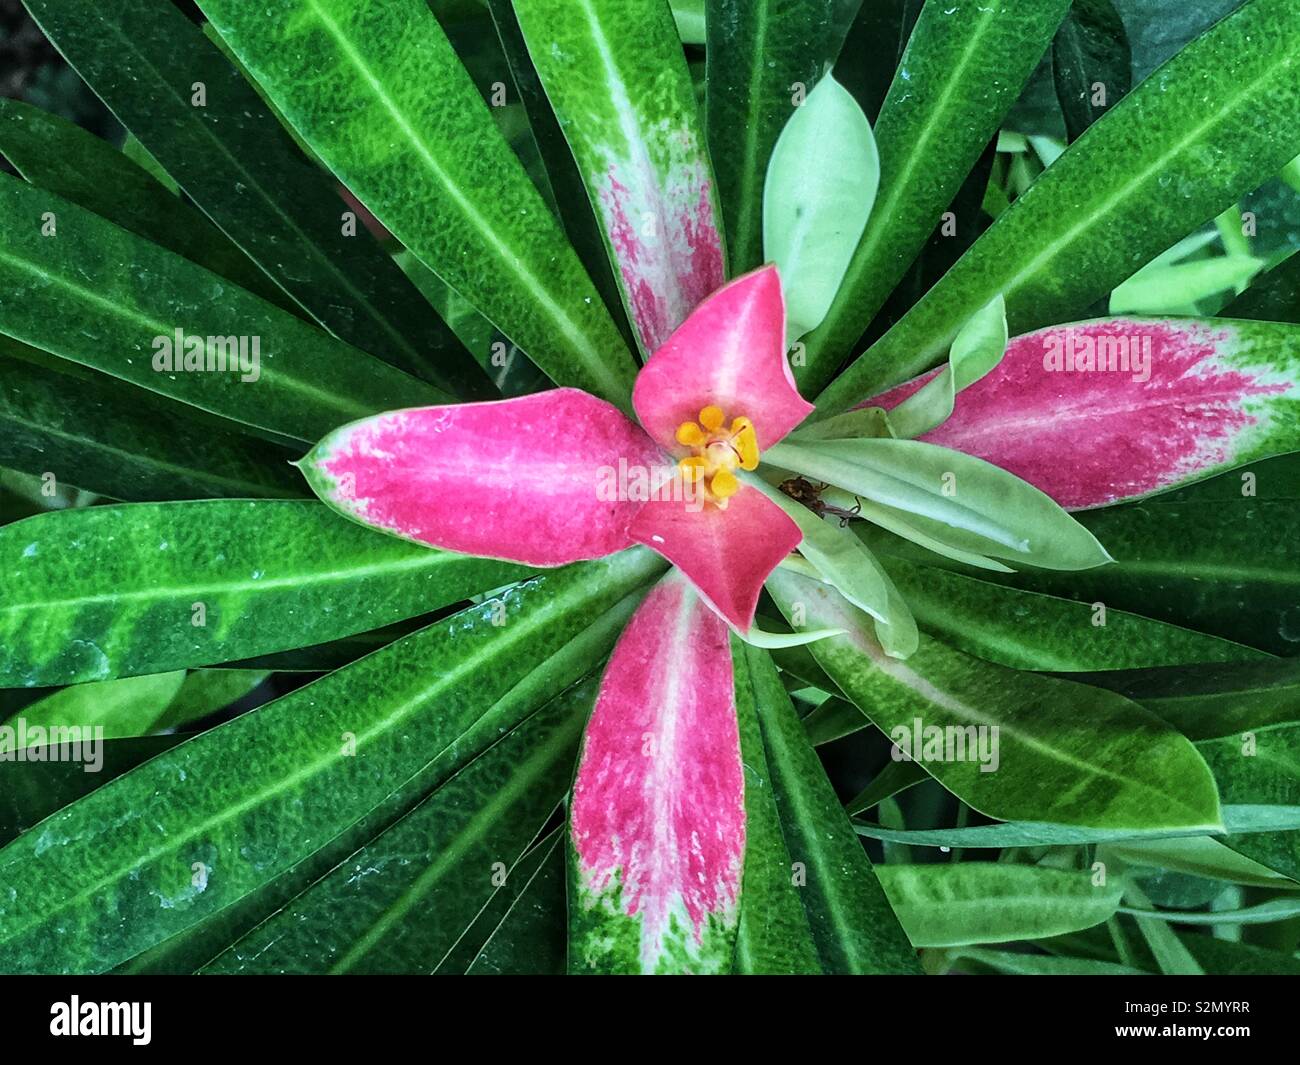 Top view of a bromeliad plant with a pink bloom. Stock Photo